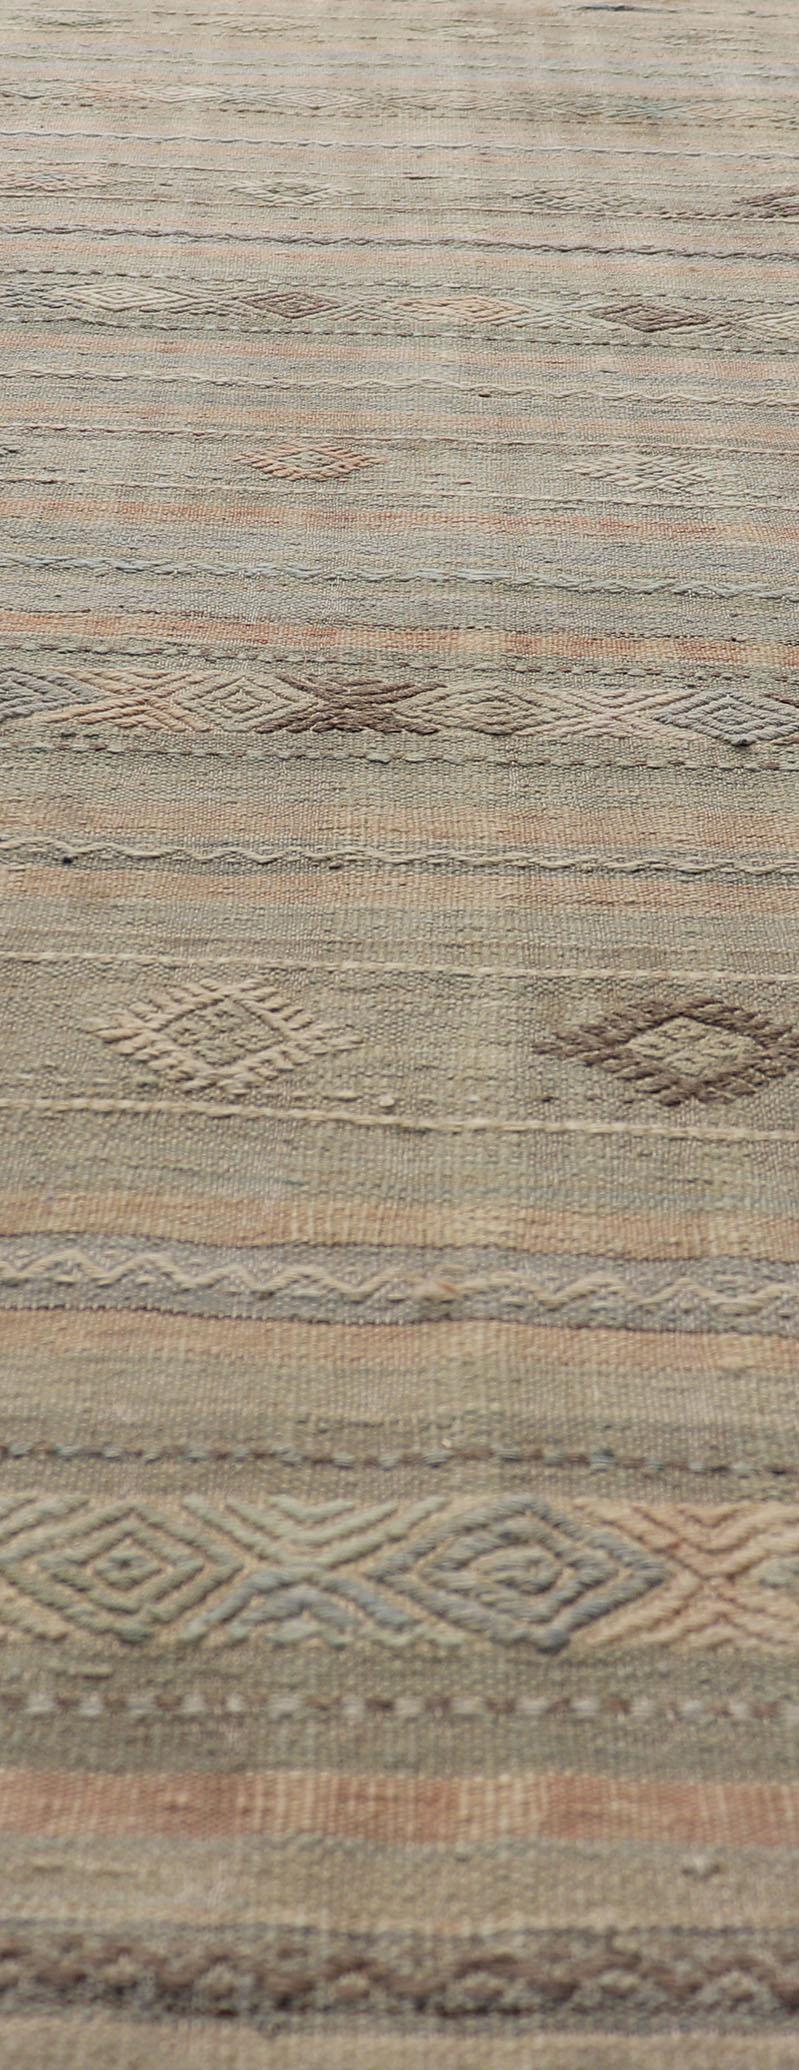 Geometric Embroidered Vintage Turkish Flat-Weave Runner in Warm Tones For Sale 3